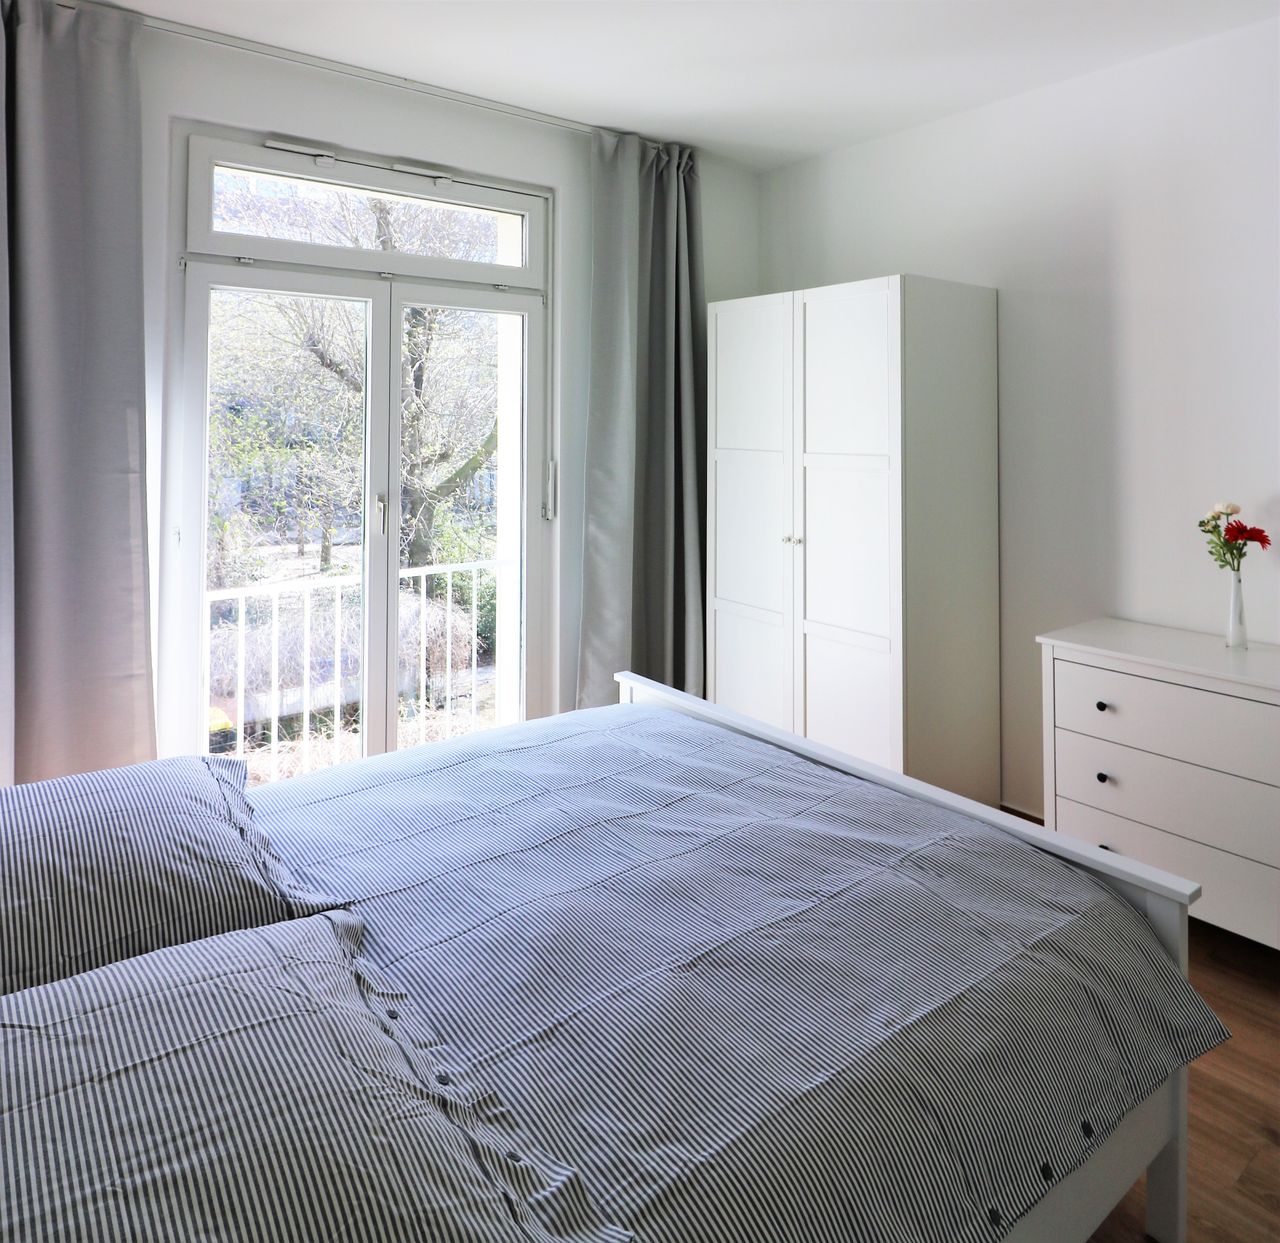 3-room flat with a view of Charlottenburg Palace